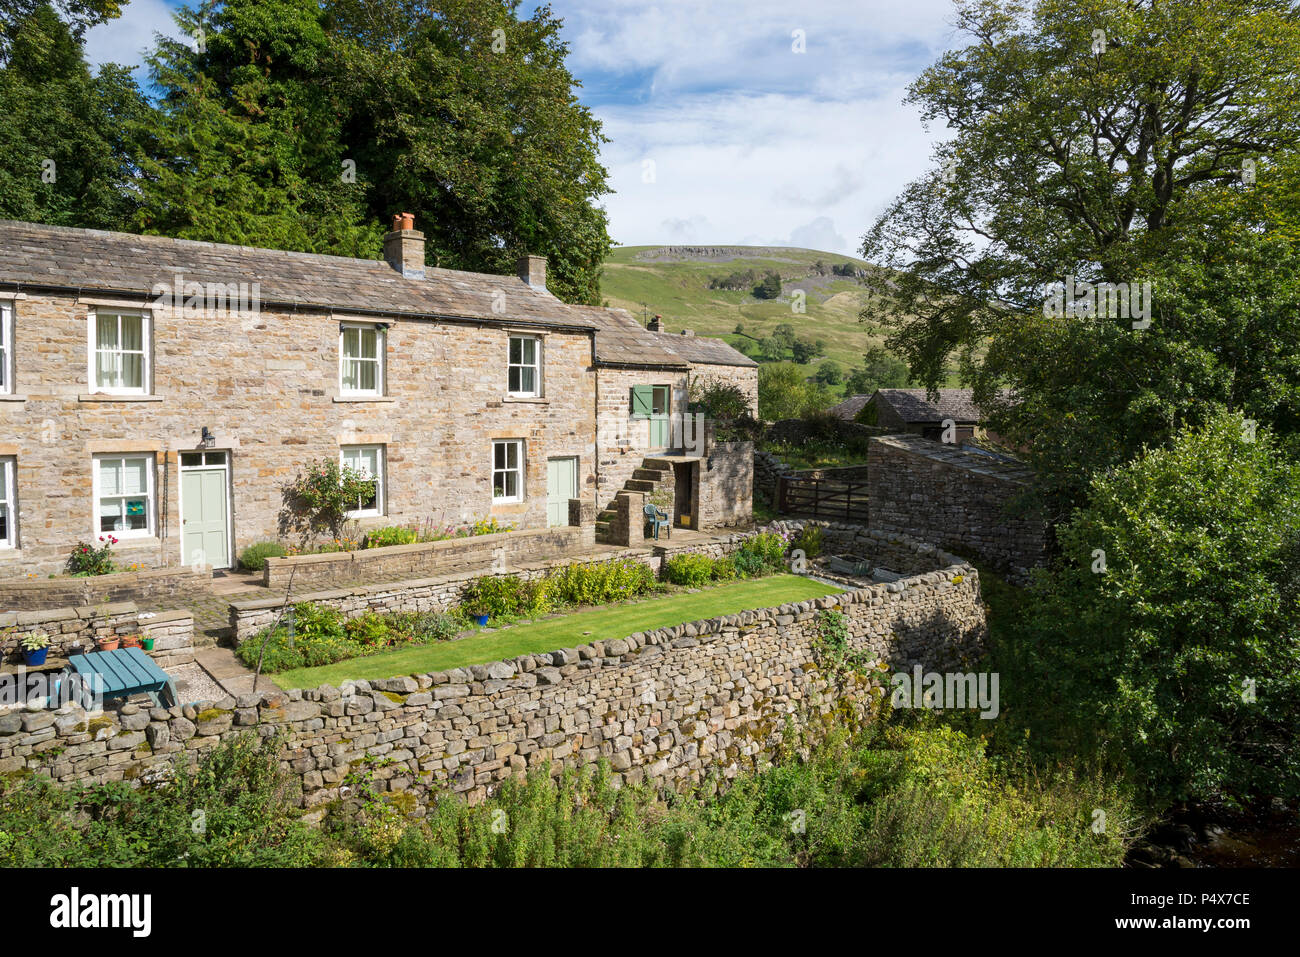 Cottages beside the river Swale in the vilage of Muker, Swaedale, North Yorkshire, England. Stock Photo